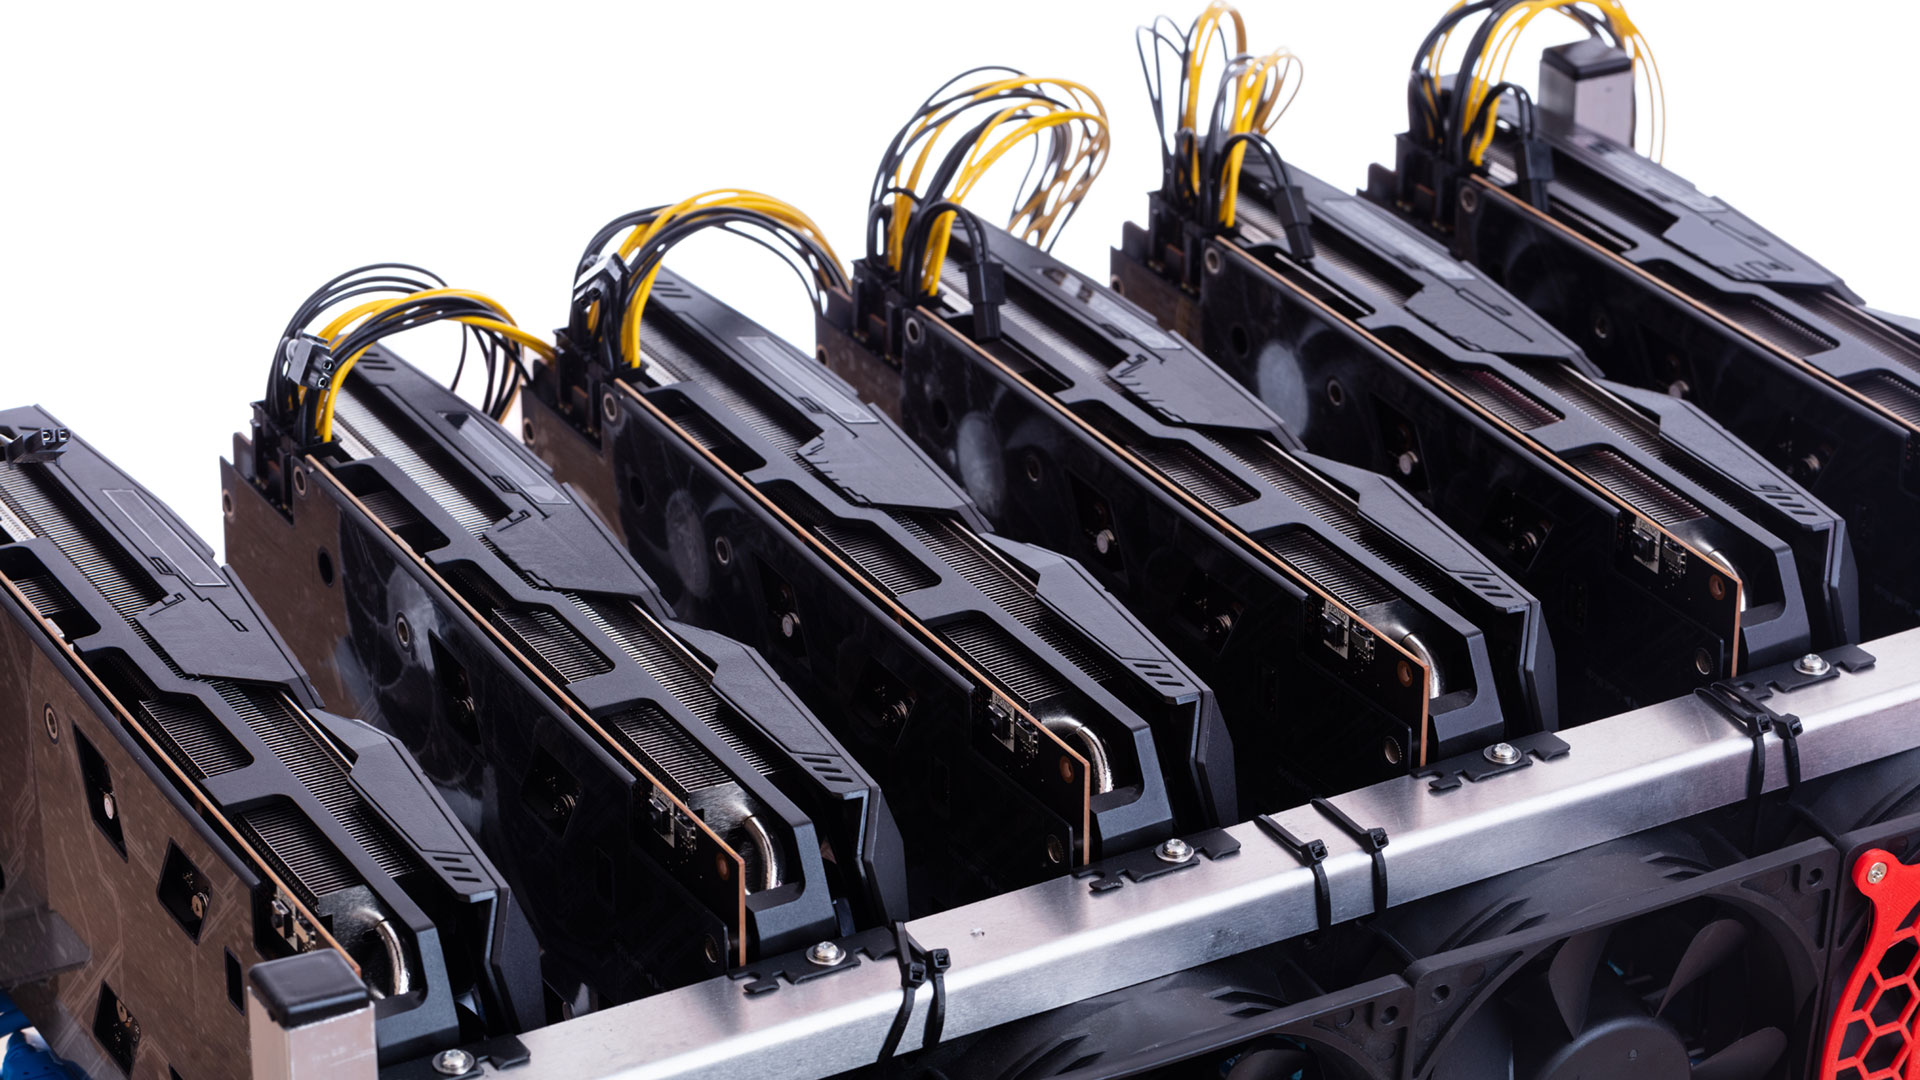 How to Optimize Your GPU for Ethereum Mining | Hardware